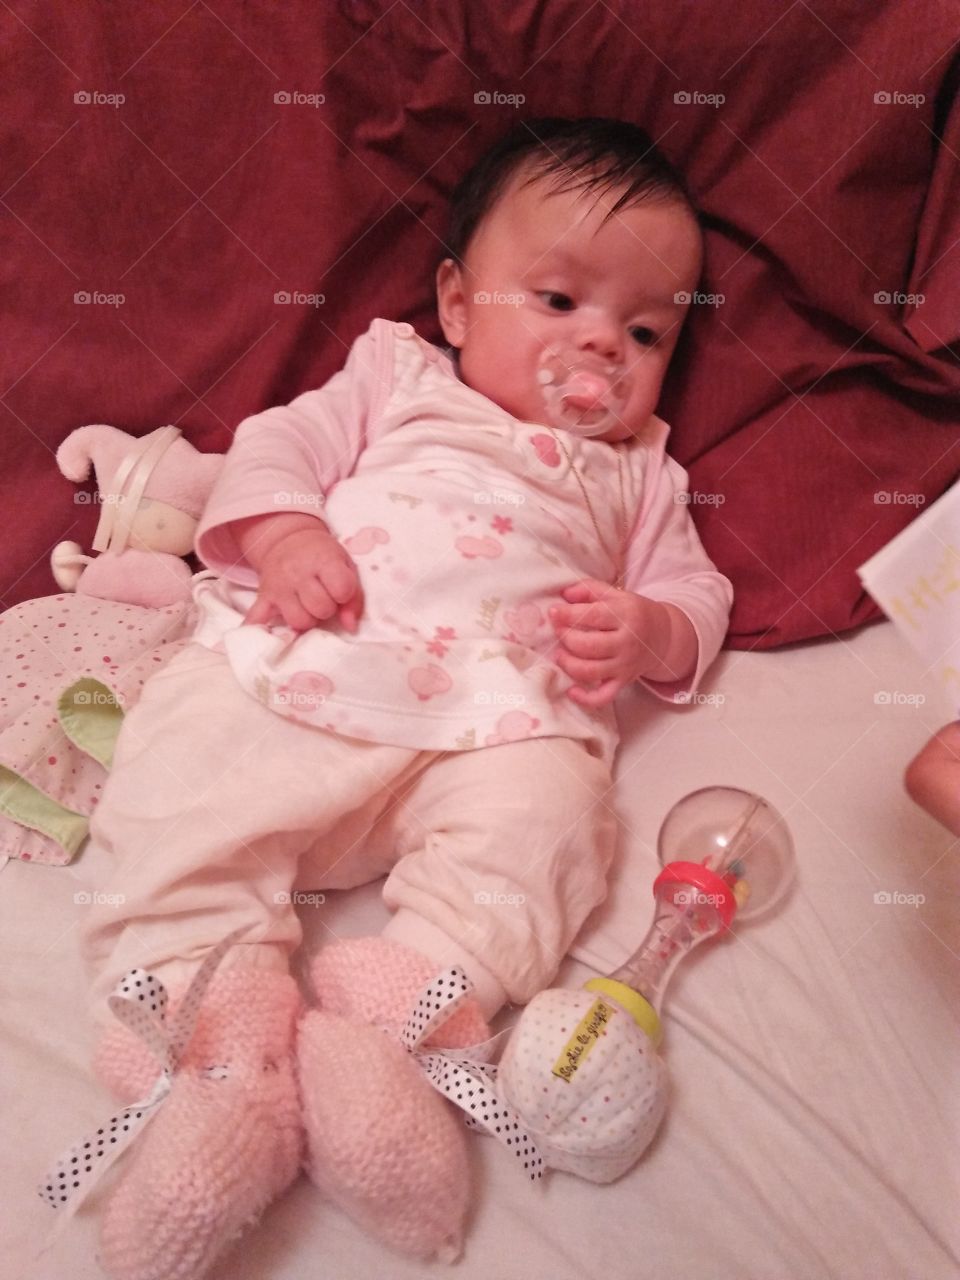 my baby wearing her little duck pink dress design, pink sweater, orange socks while on the bed with her toys.